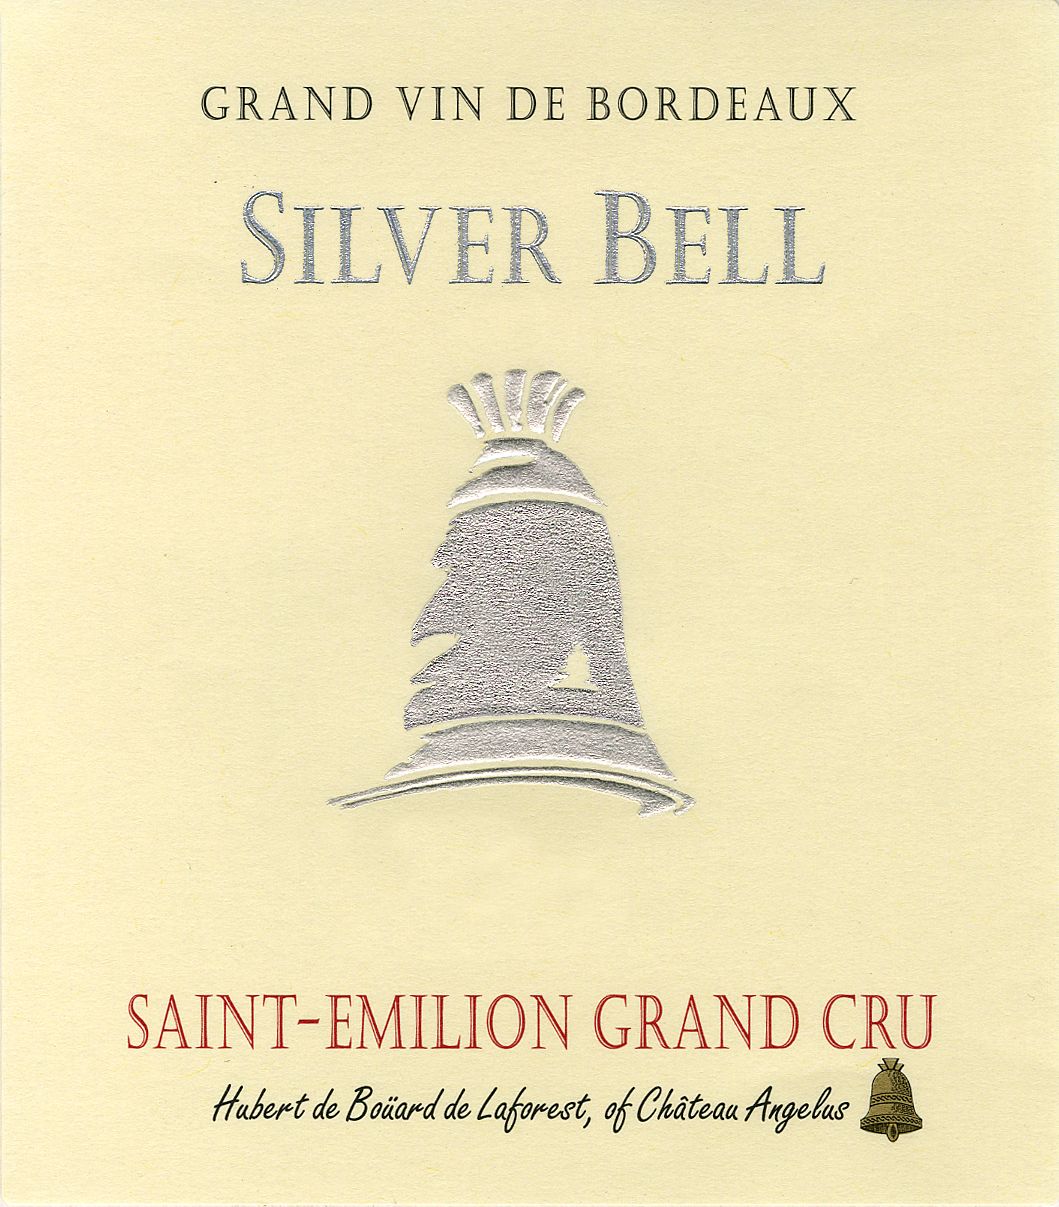 Silver Bell label